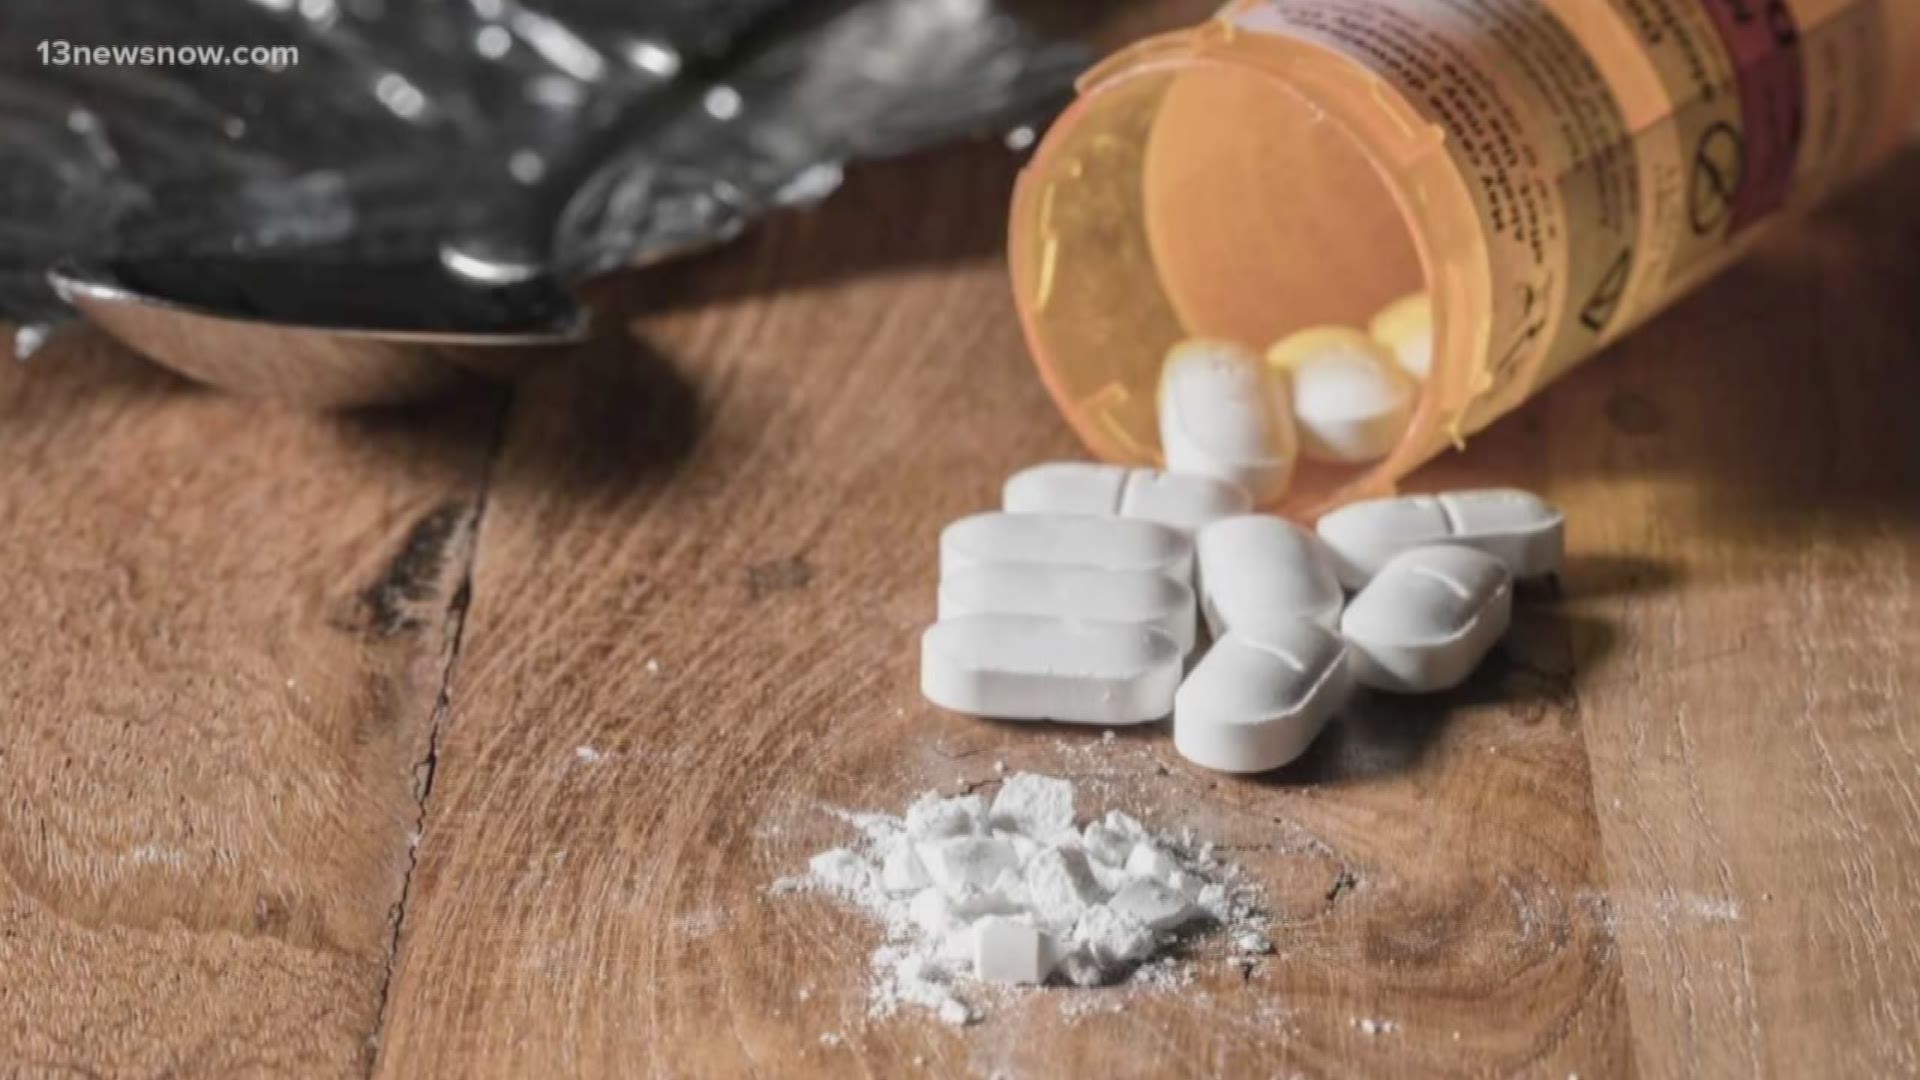 A report released by the Virginia Department of Health shows the number of fatal opioid overdoses is dropping.